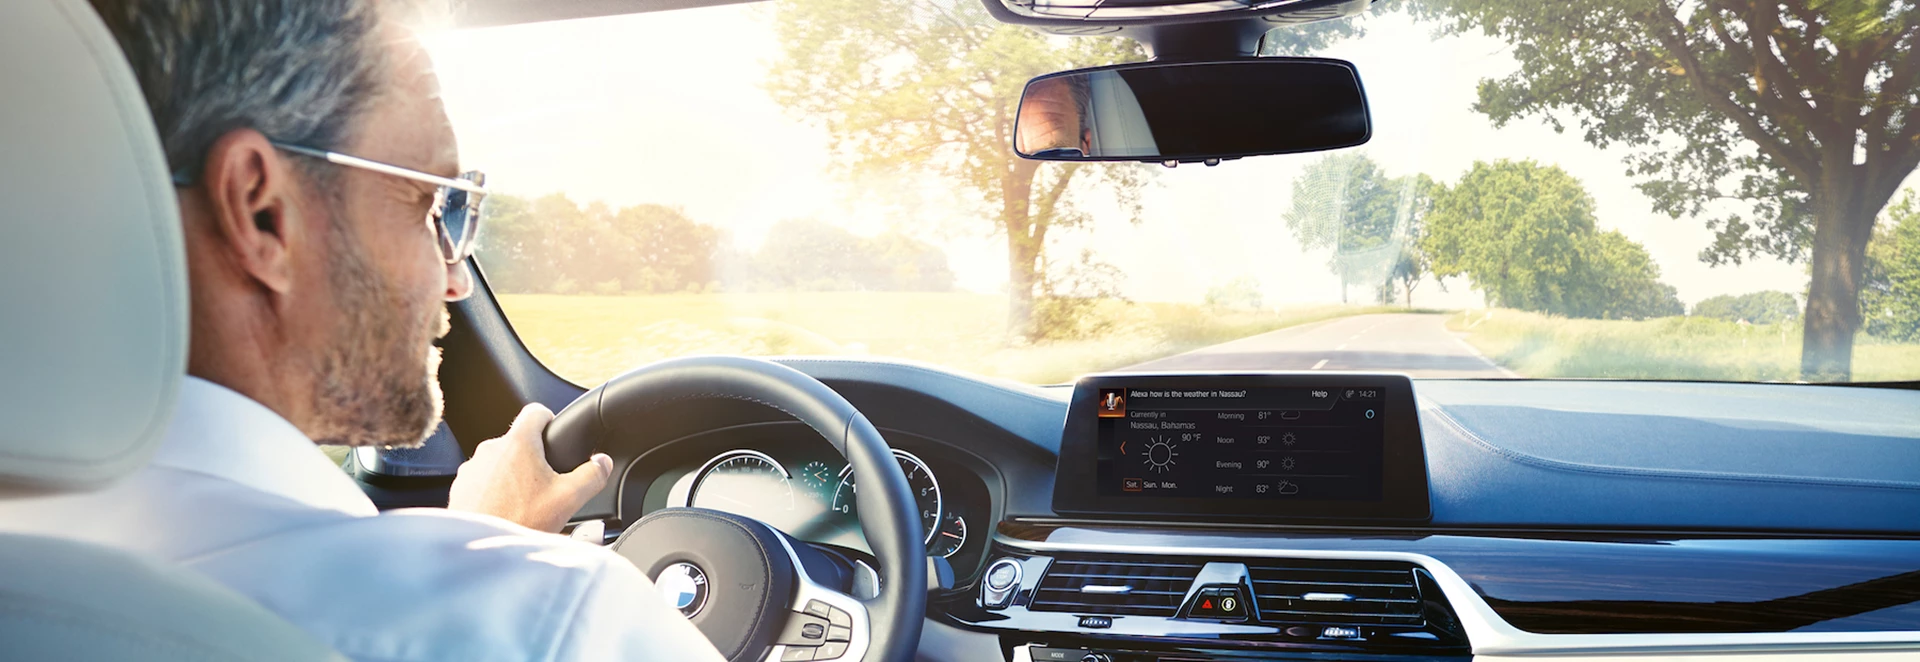 BMW Cars will soon allow you to shop while you drive 